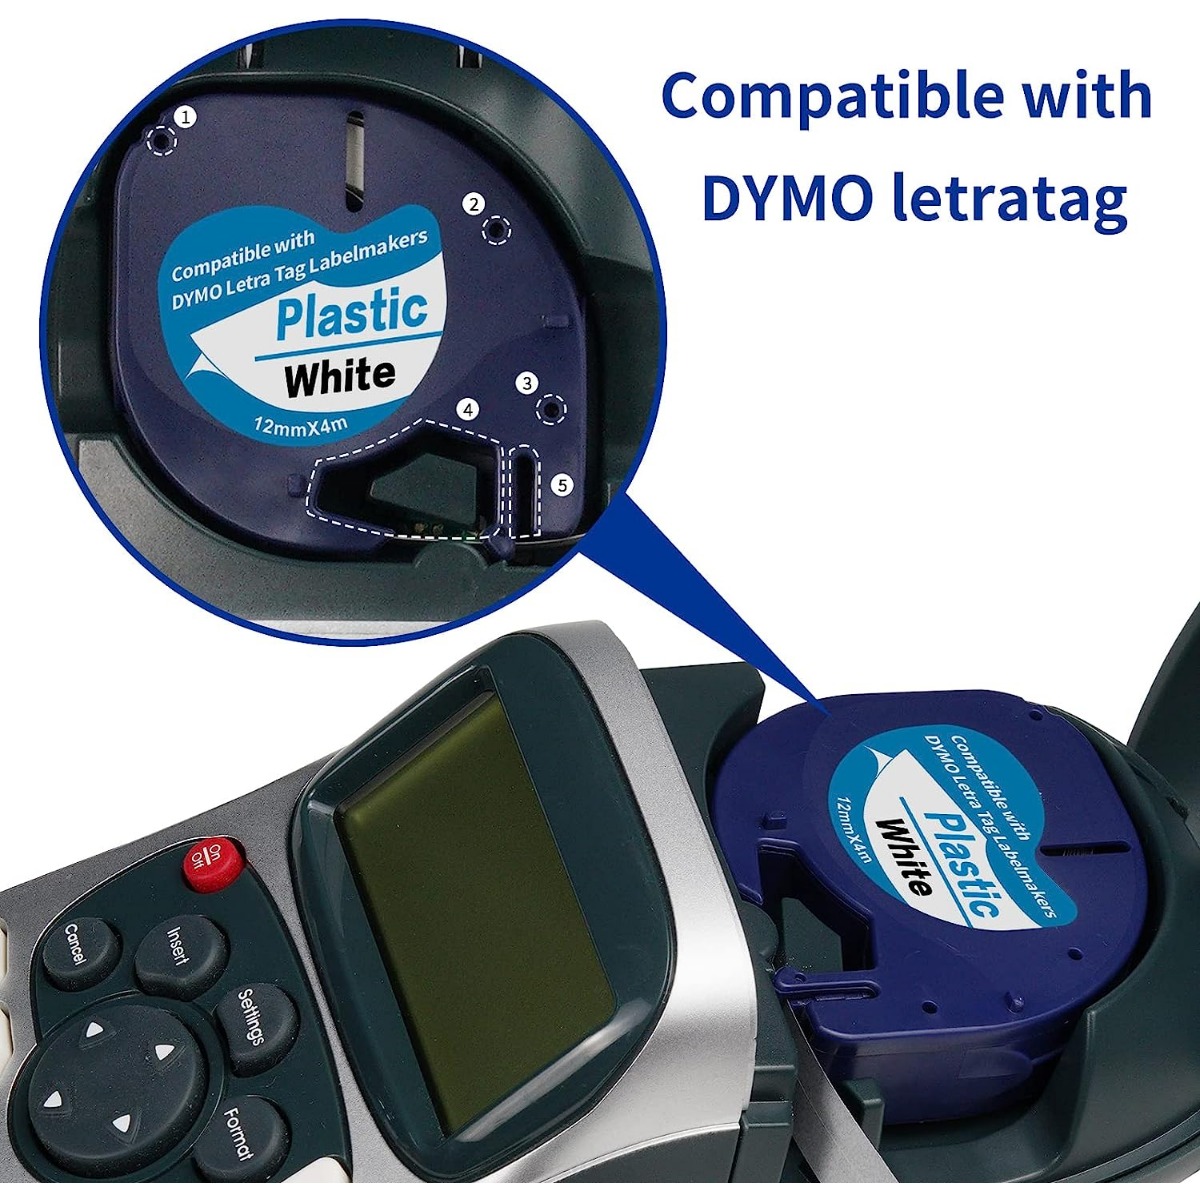 How to use a Dymo LetraTag LT100H 